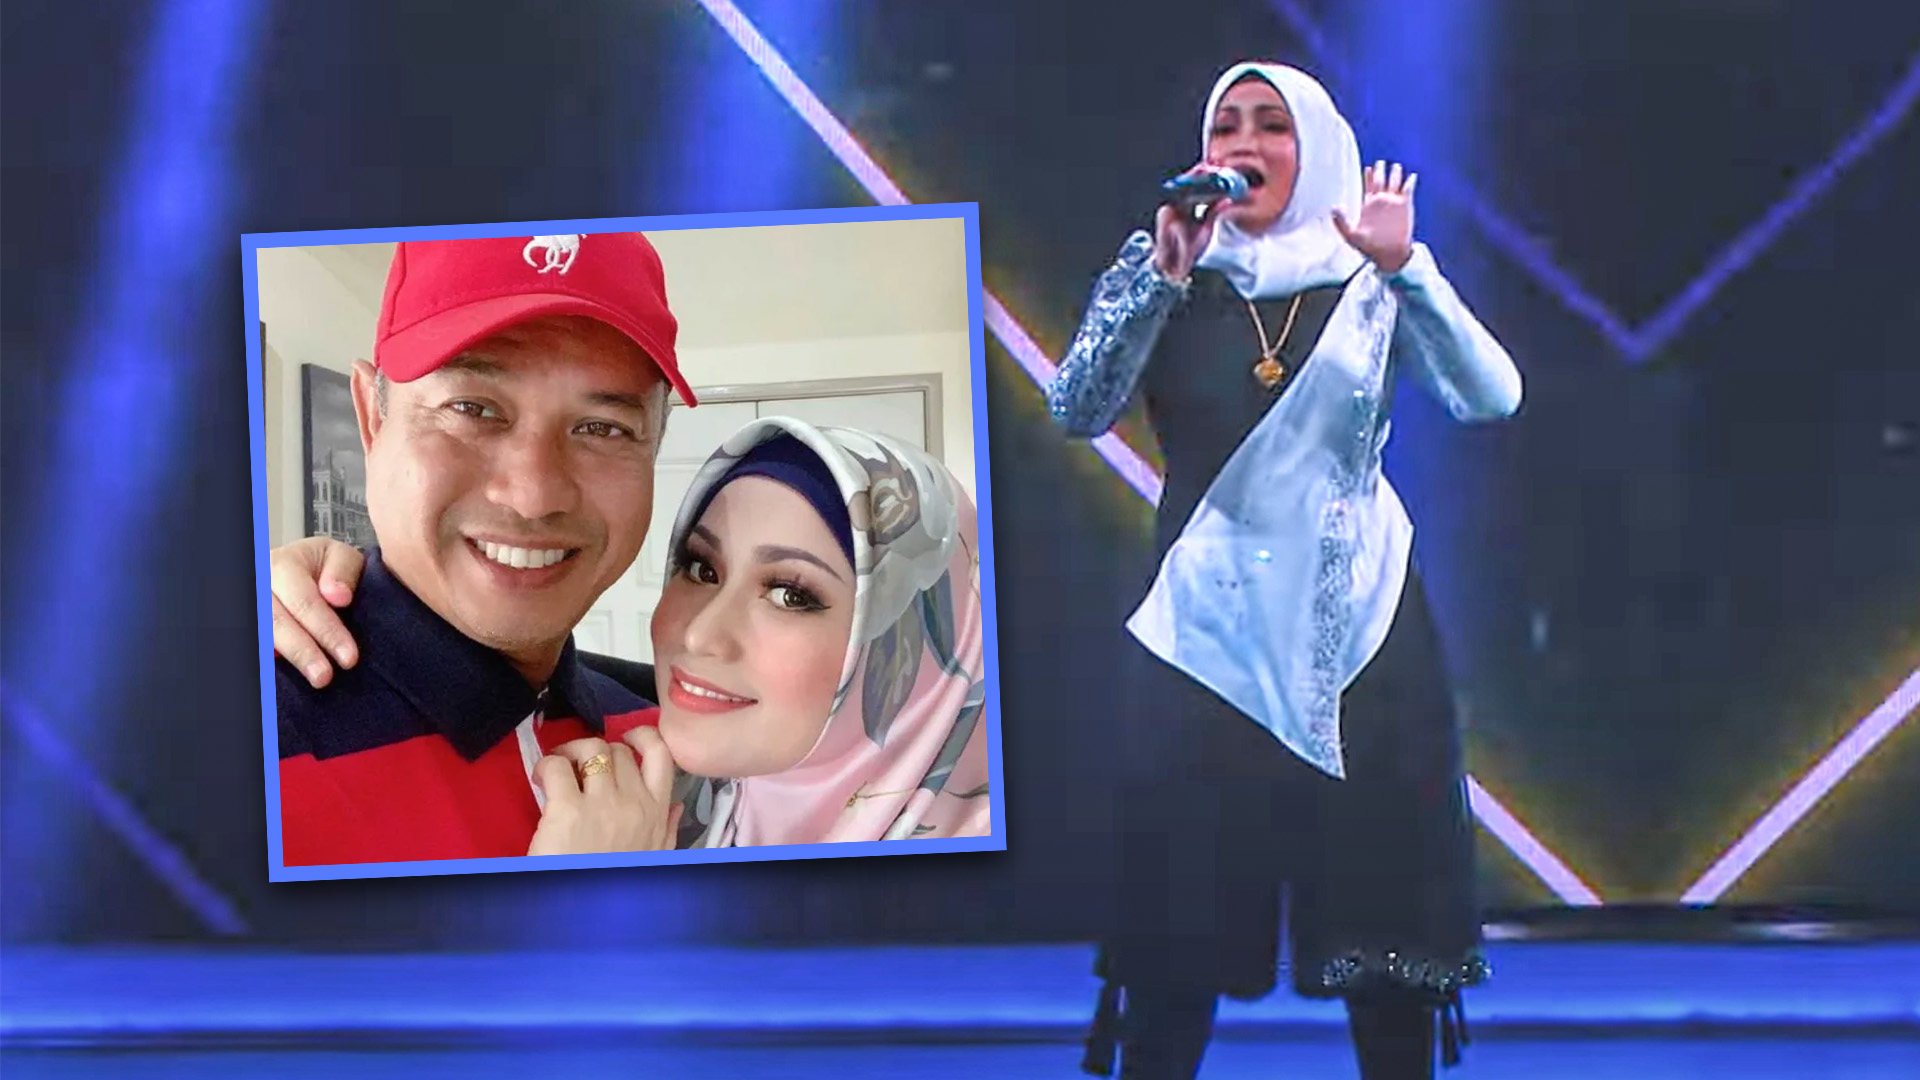 A famous Malaysian singer who helped her husband find a young second wife so she can focus on her career has shocked her fans and divided public opinion. Photo: SCMP composite/YouTube/Instagram